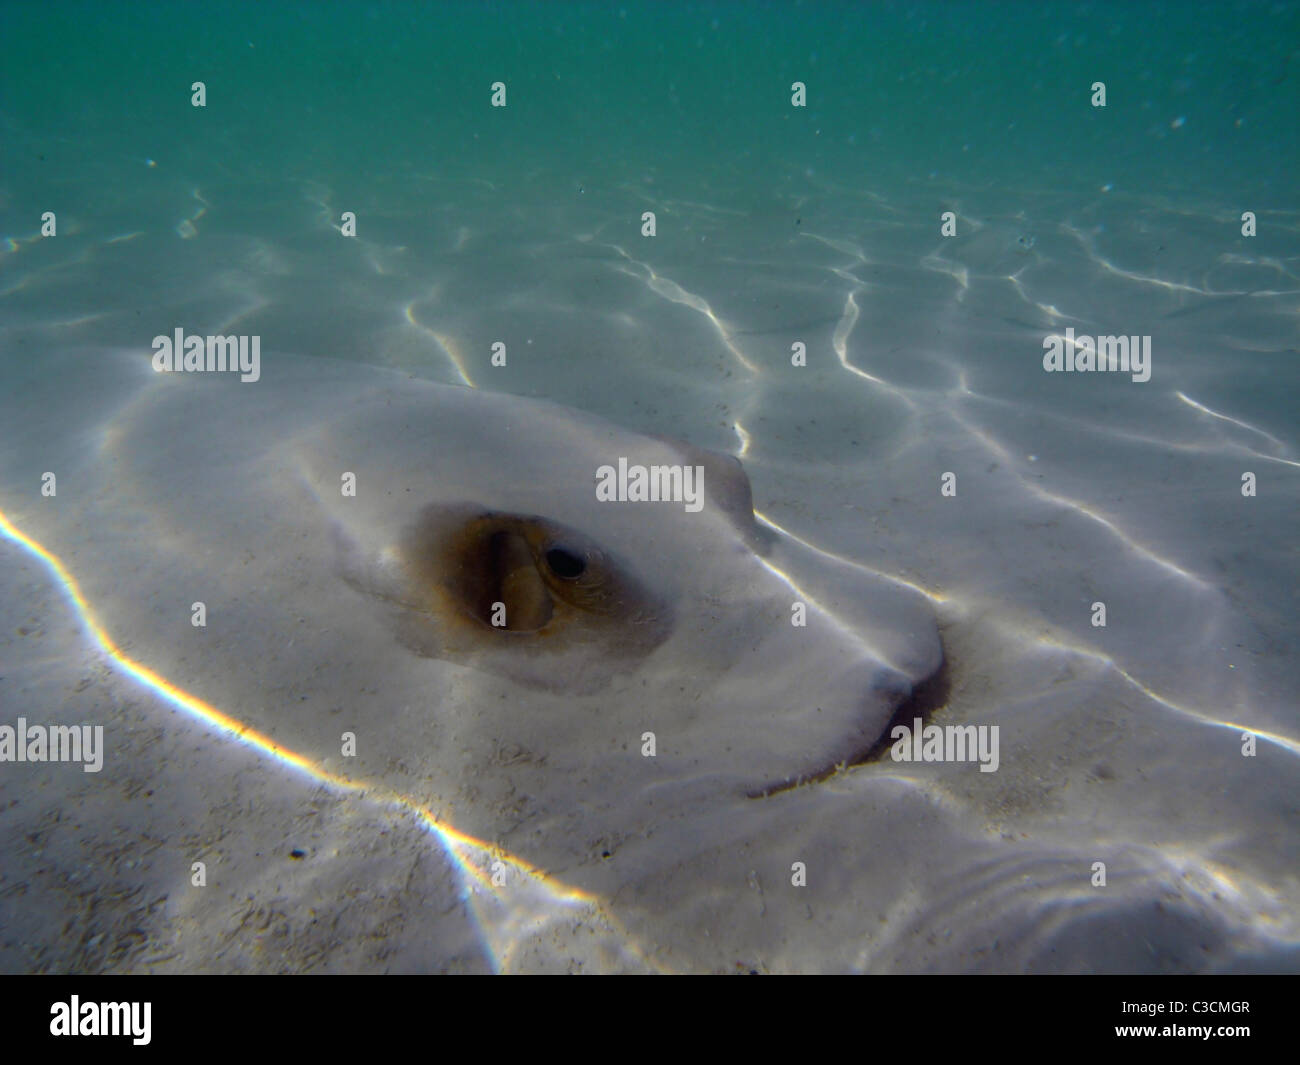 Stingray buried in sand in shallow water Stock Photo